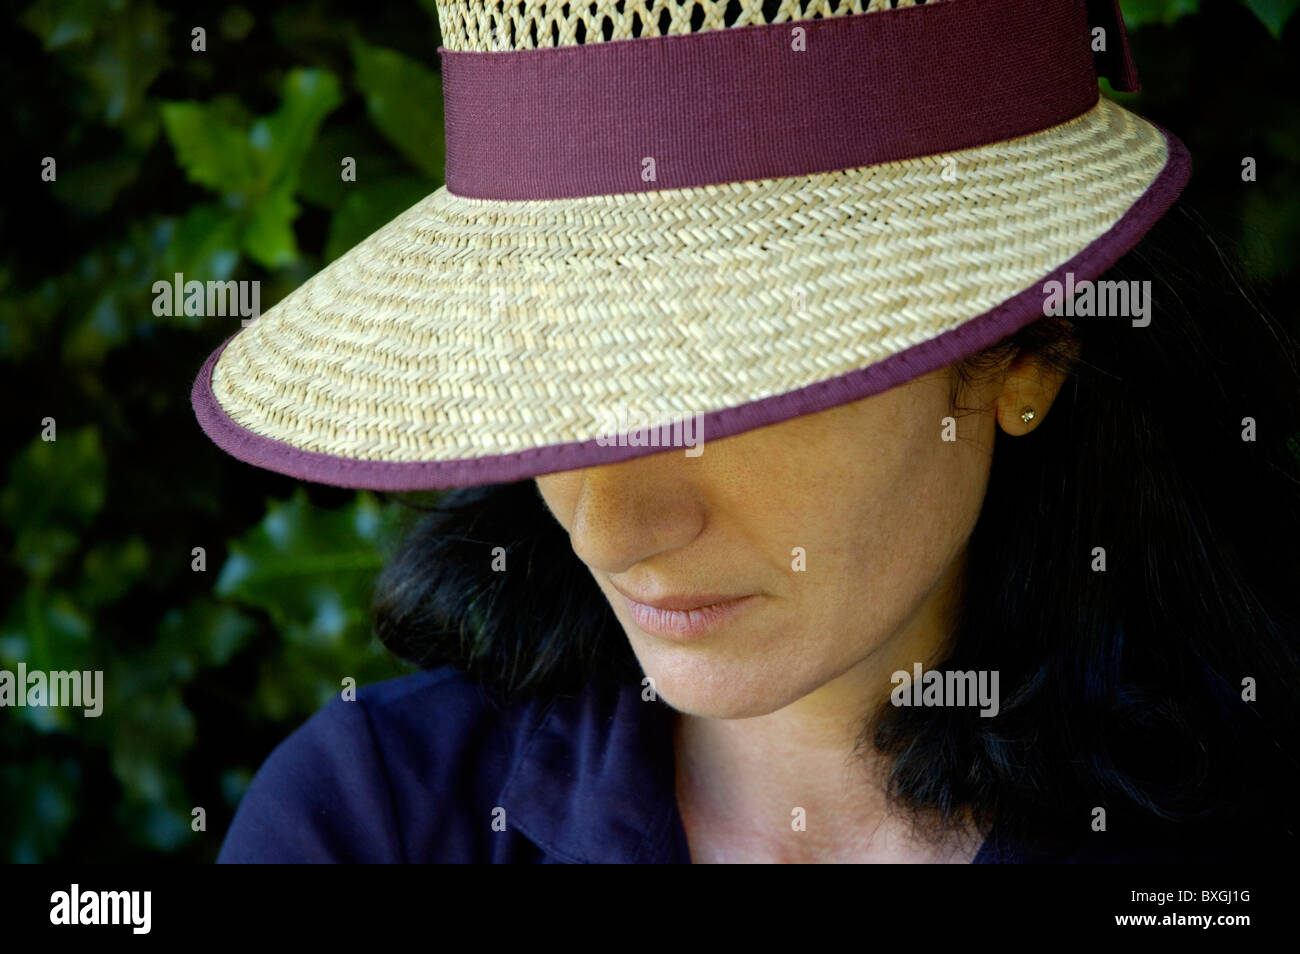 Portrait of a woman wearing a straw hat and looking sad. Stock Photo